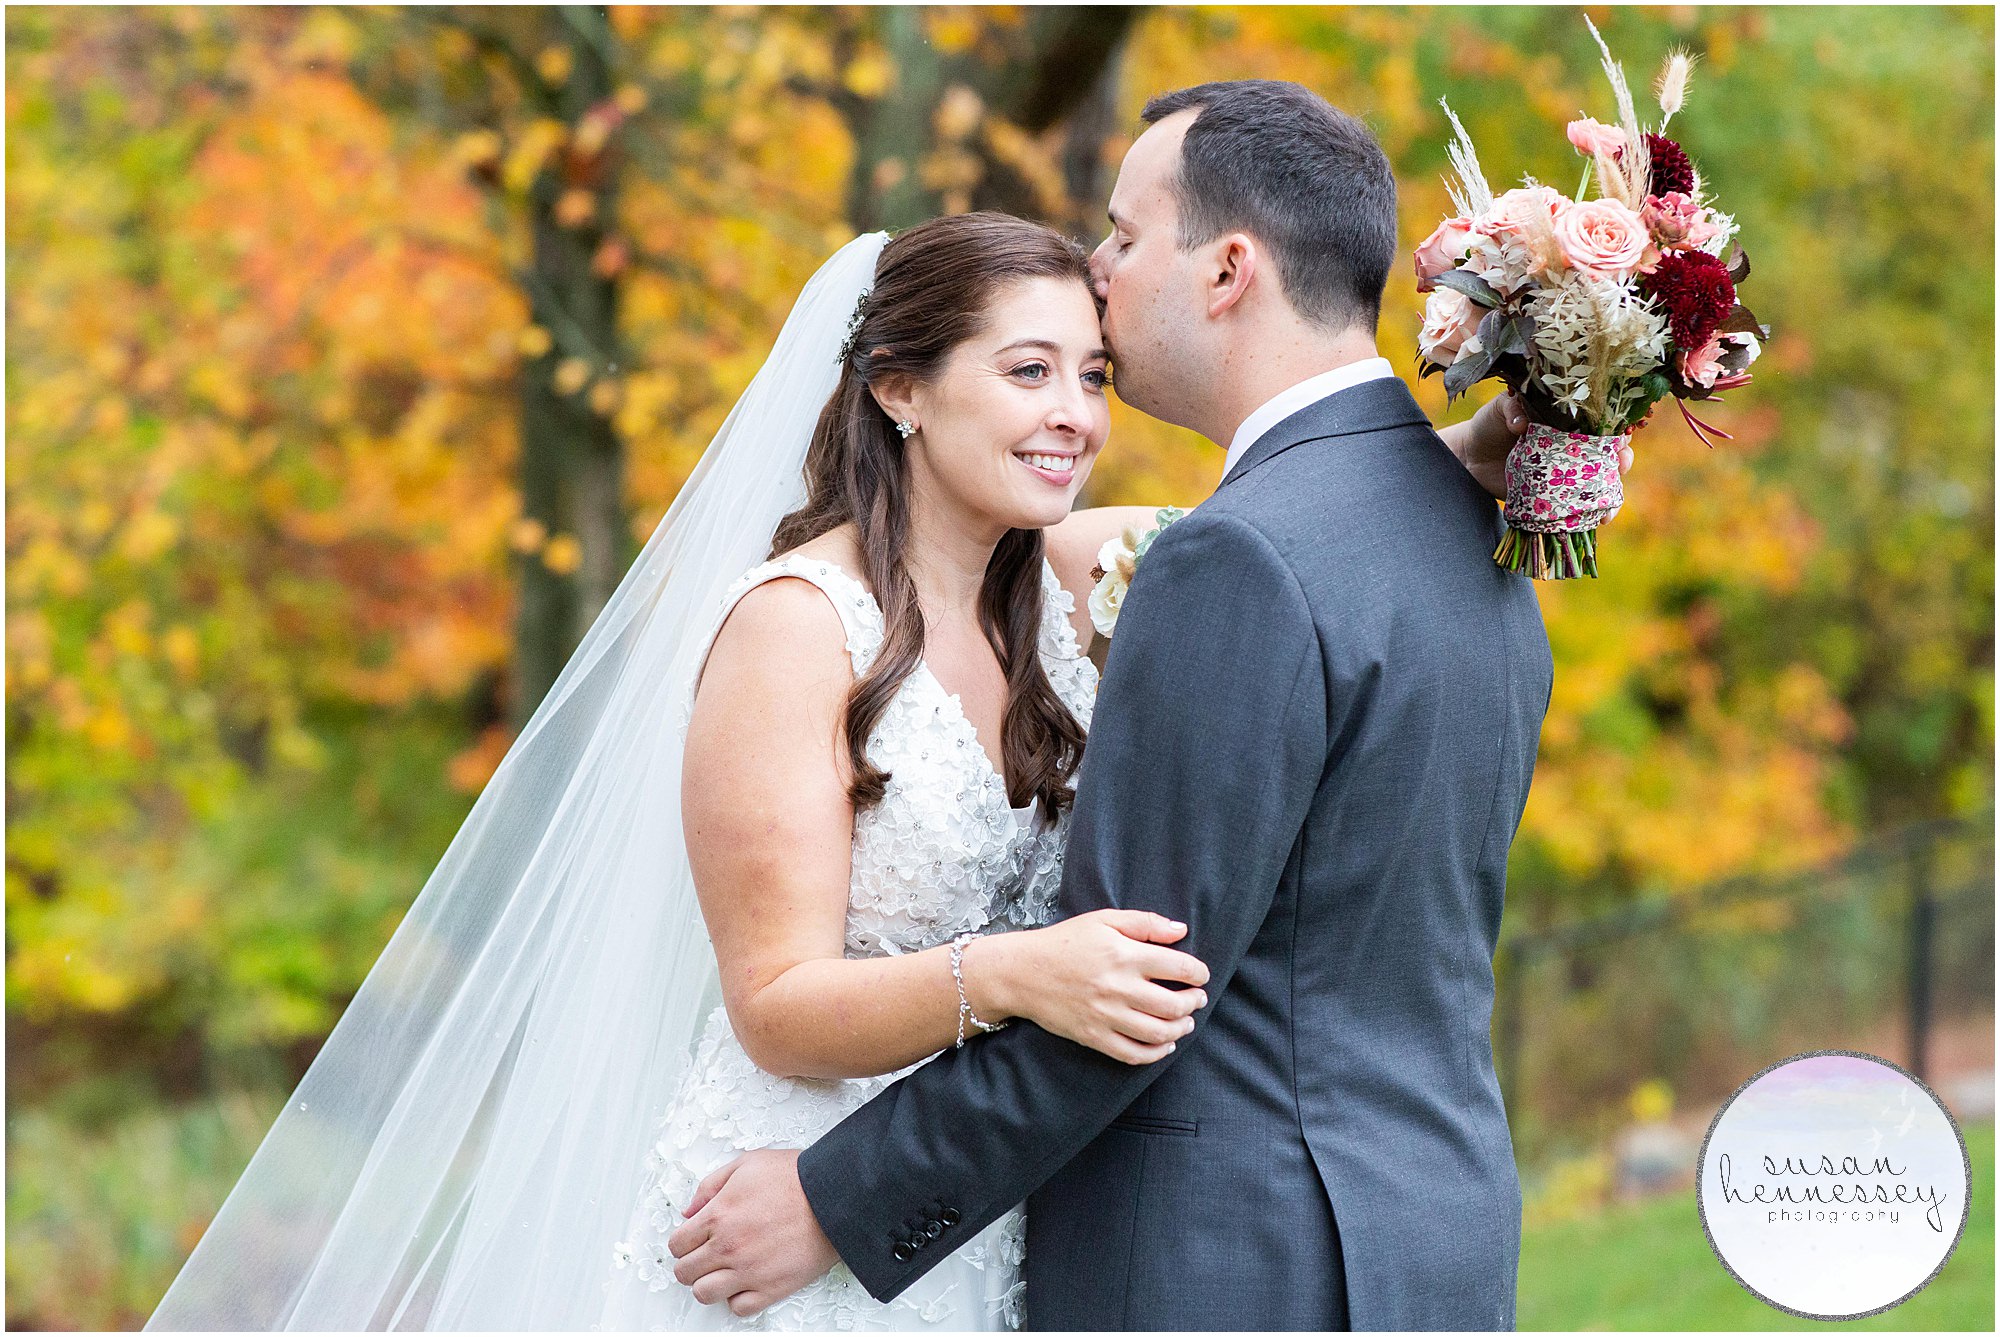 Romantic bridal portraits at Andre's Lakeside Dining Microwedding